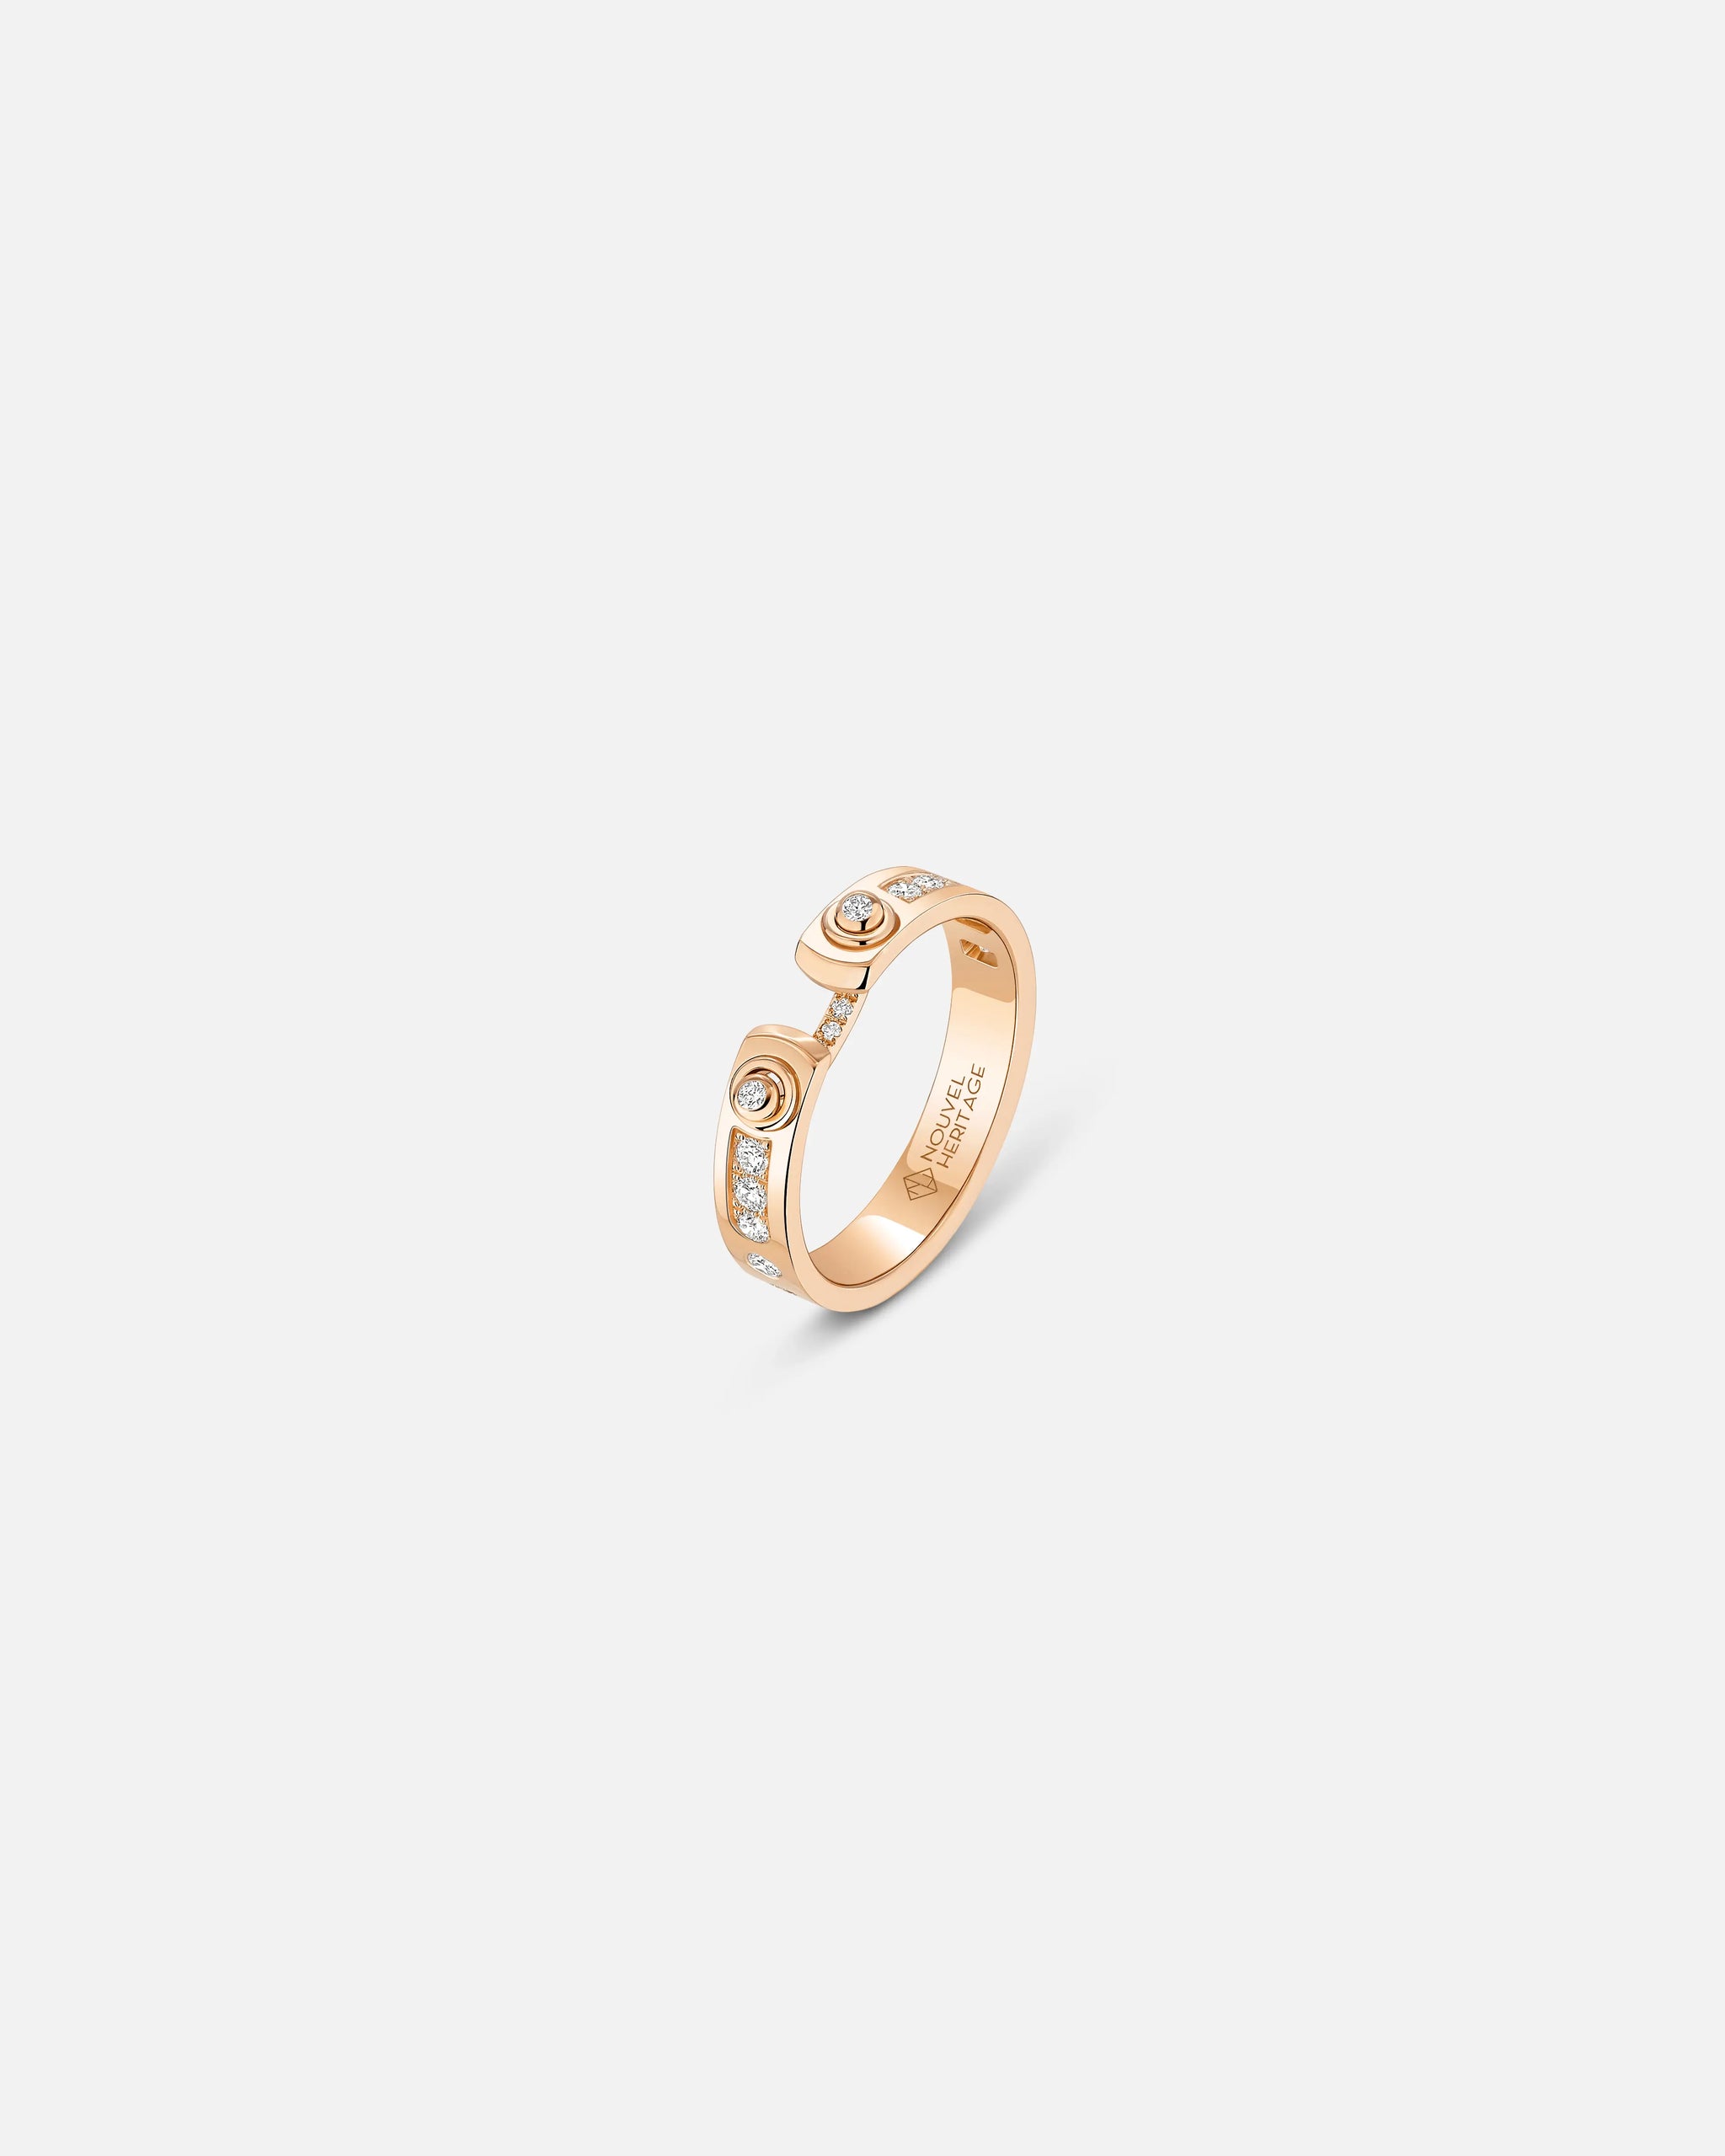 Tuxedo Mood Ring in Rose Gold - 1 - Nouvel Heritage